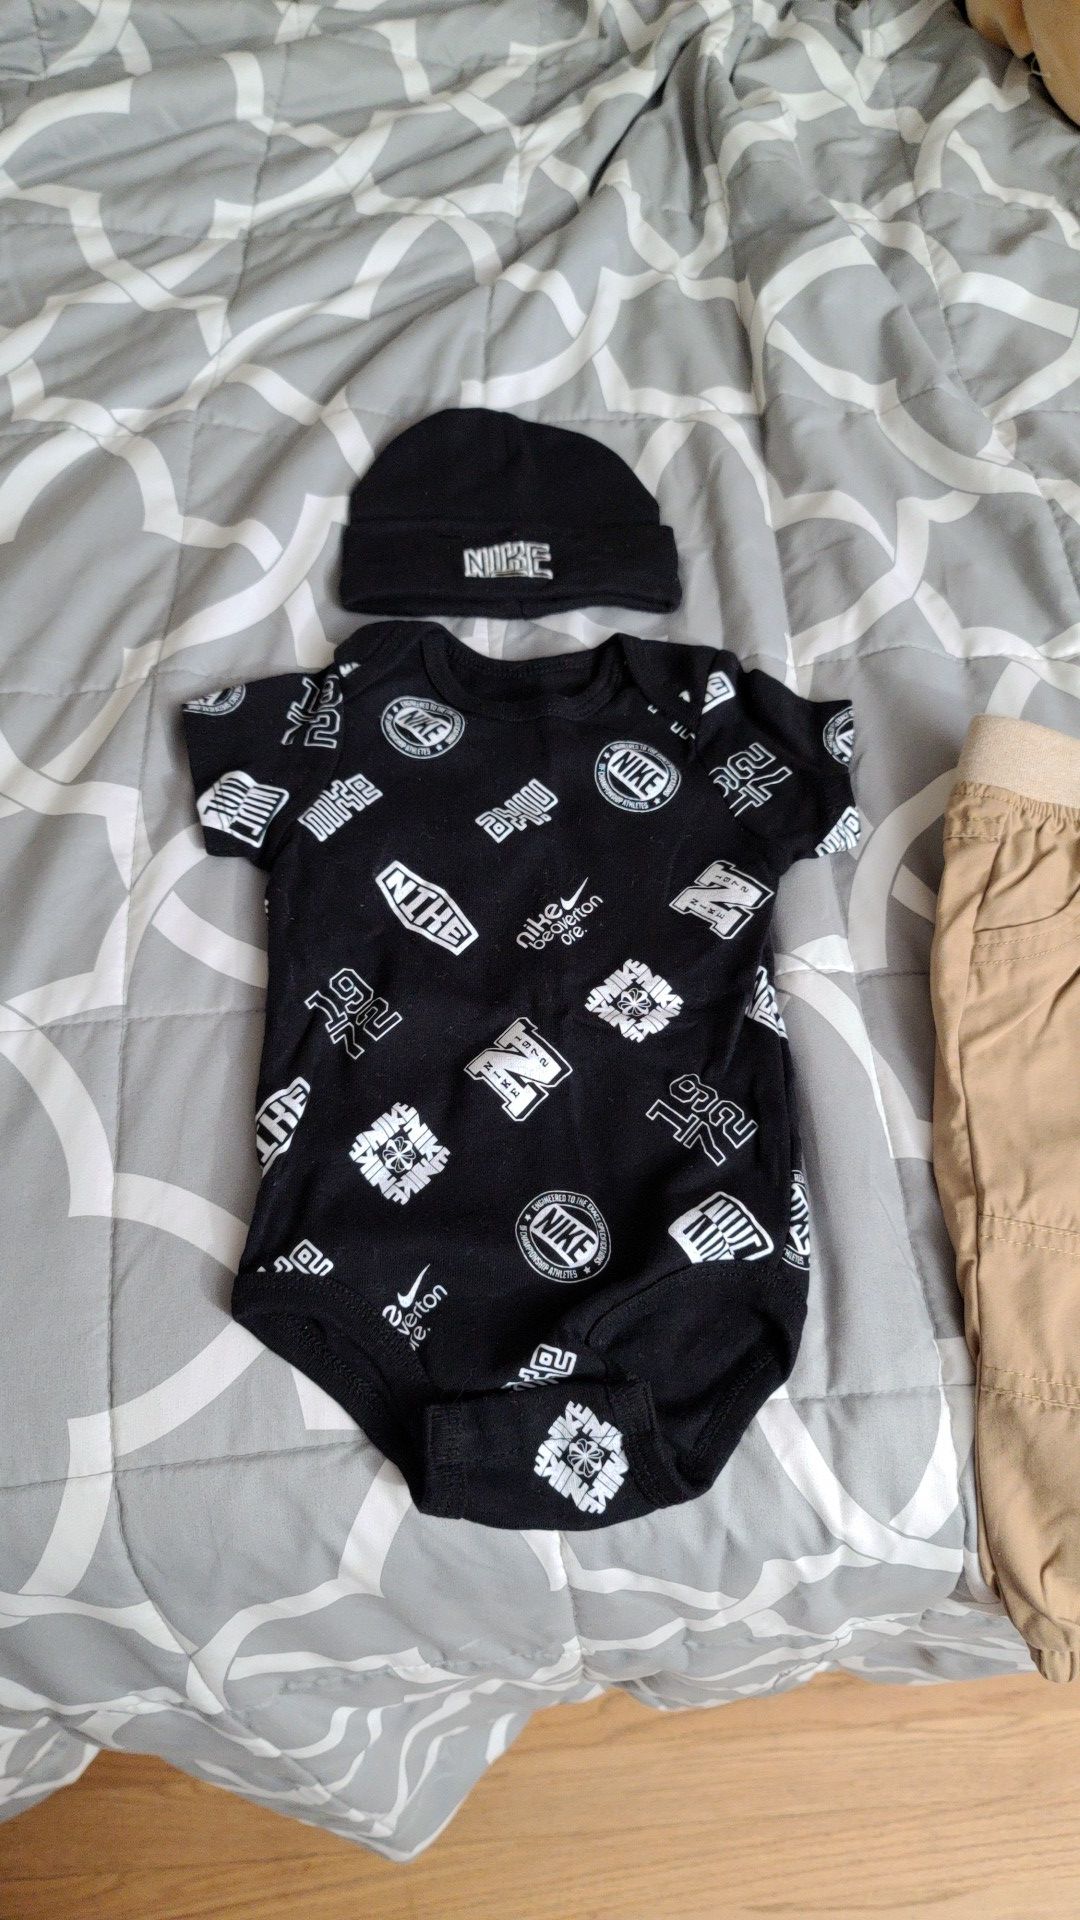 Boy clothing size 6-12 months